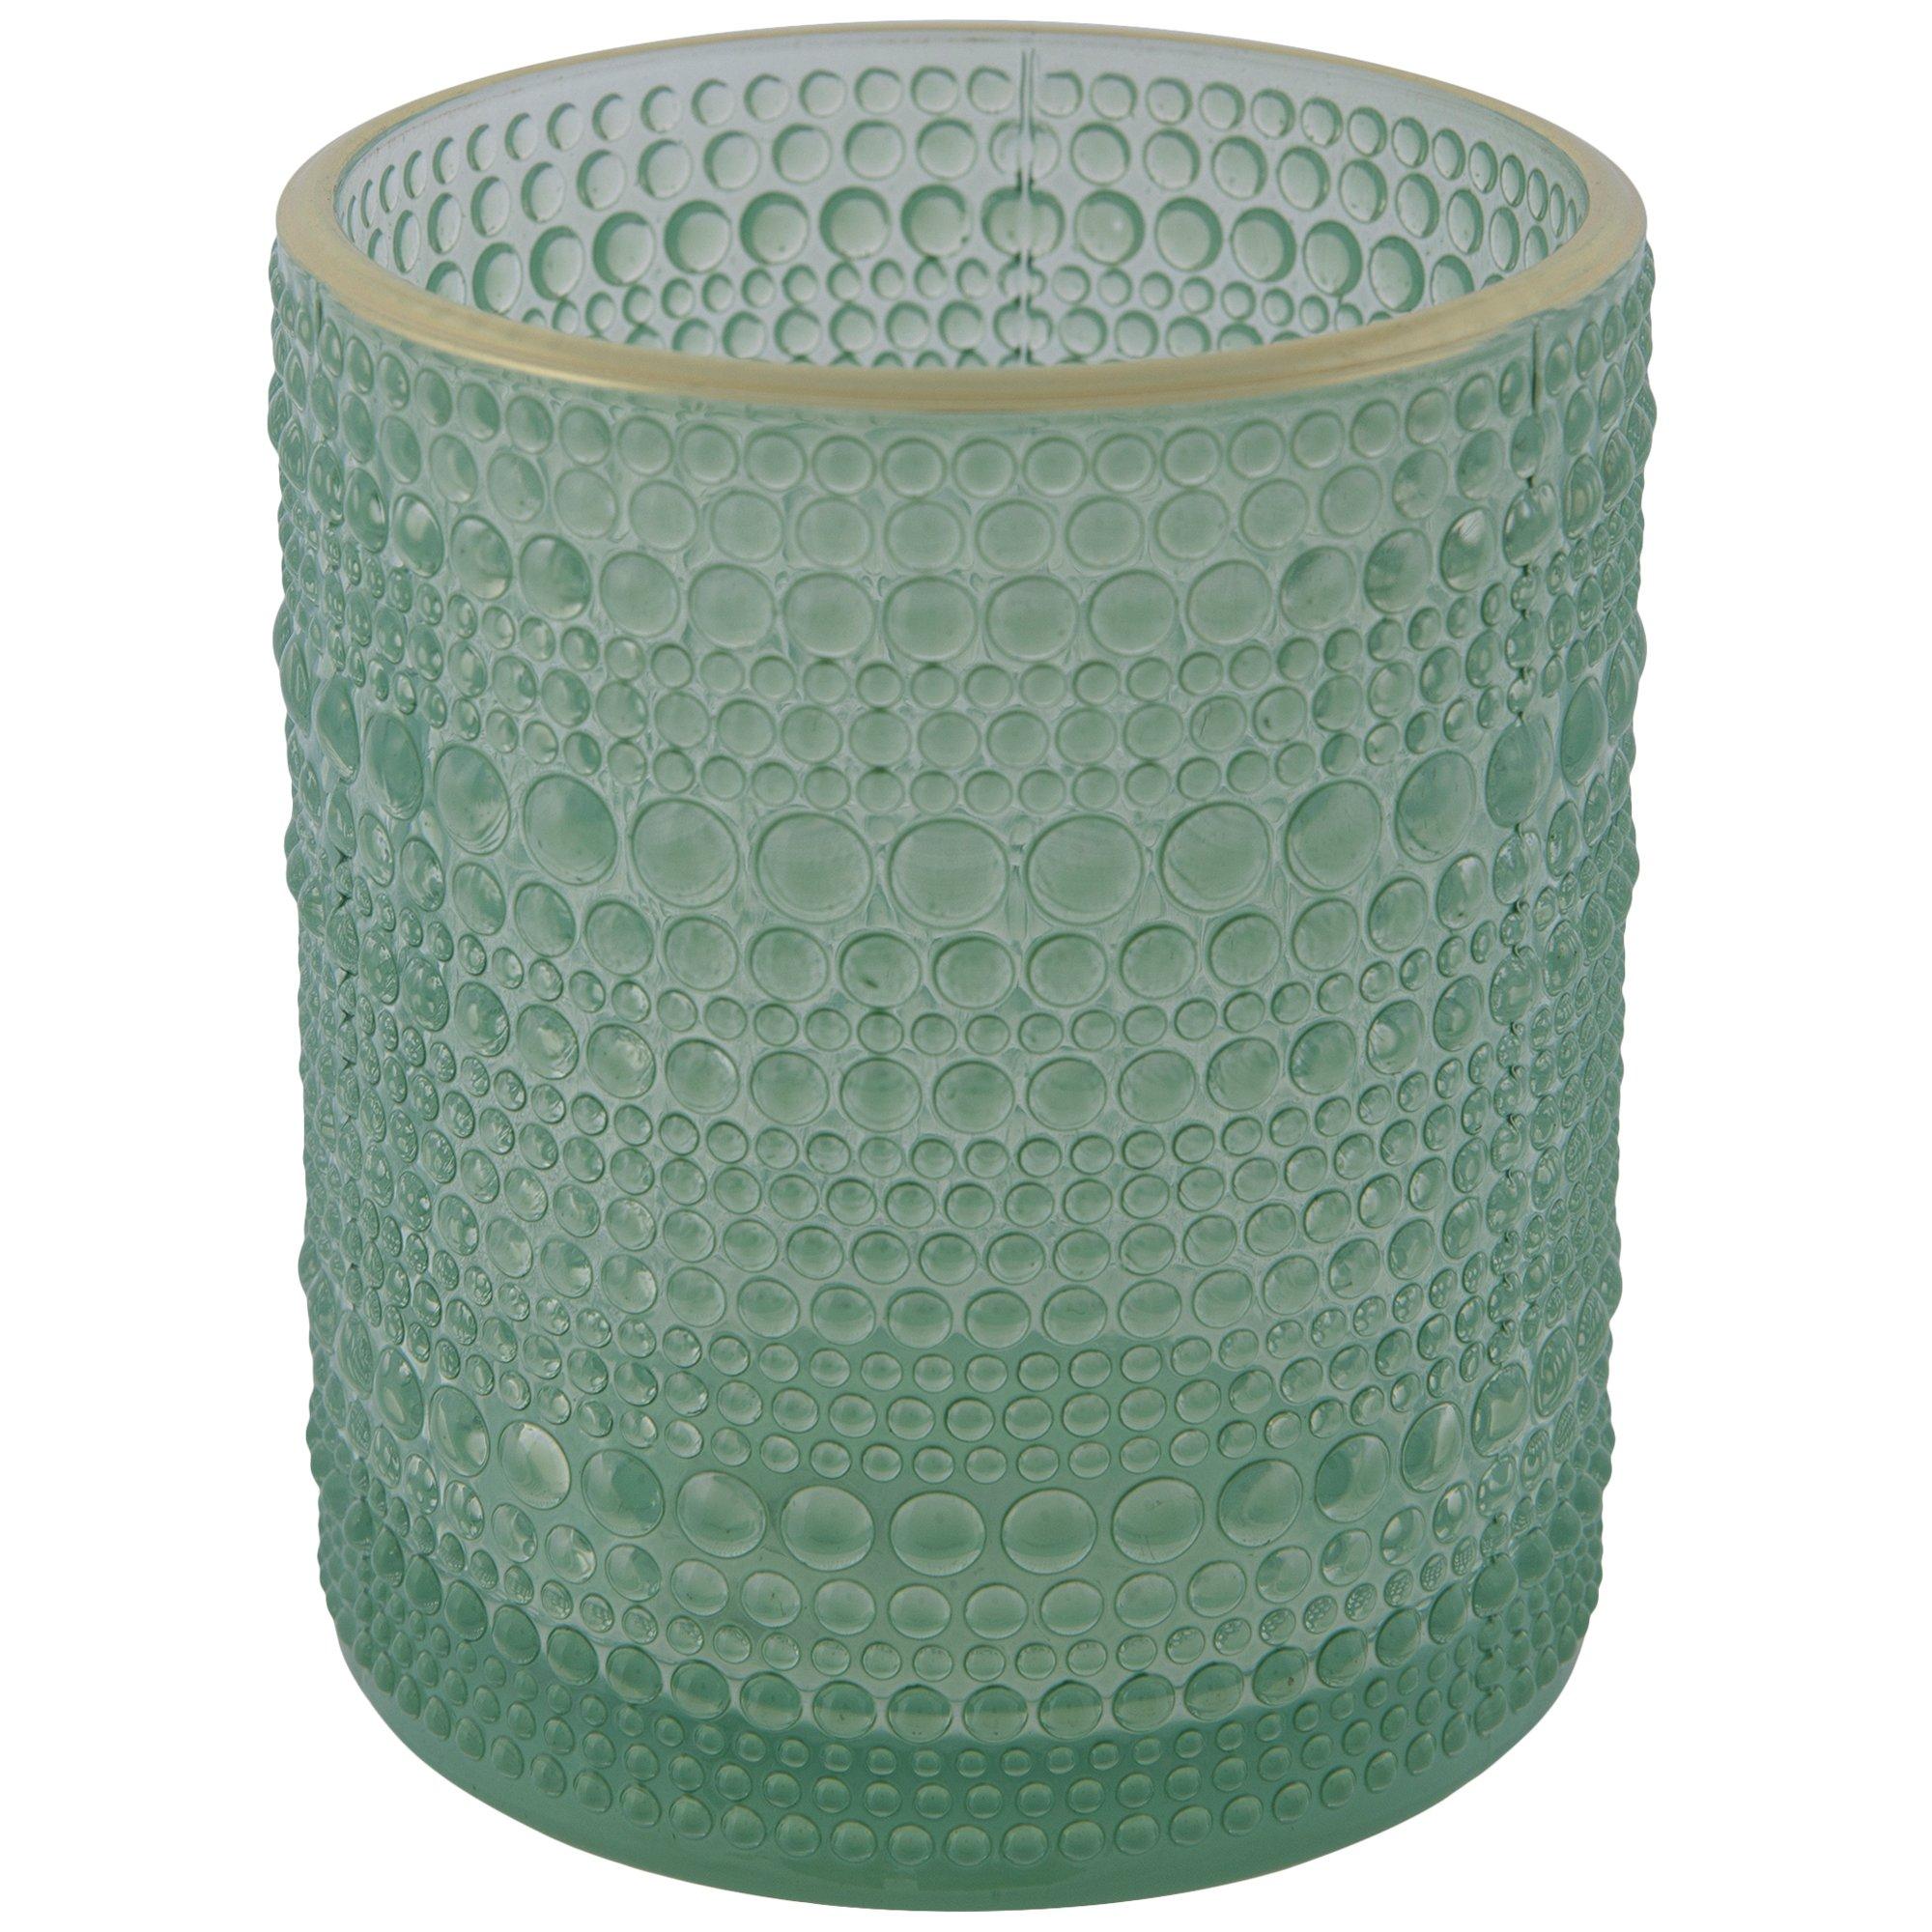 Green Bubble Glass Candle Holder | Hobby Lobby | 1961887